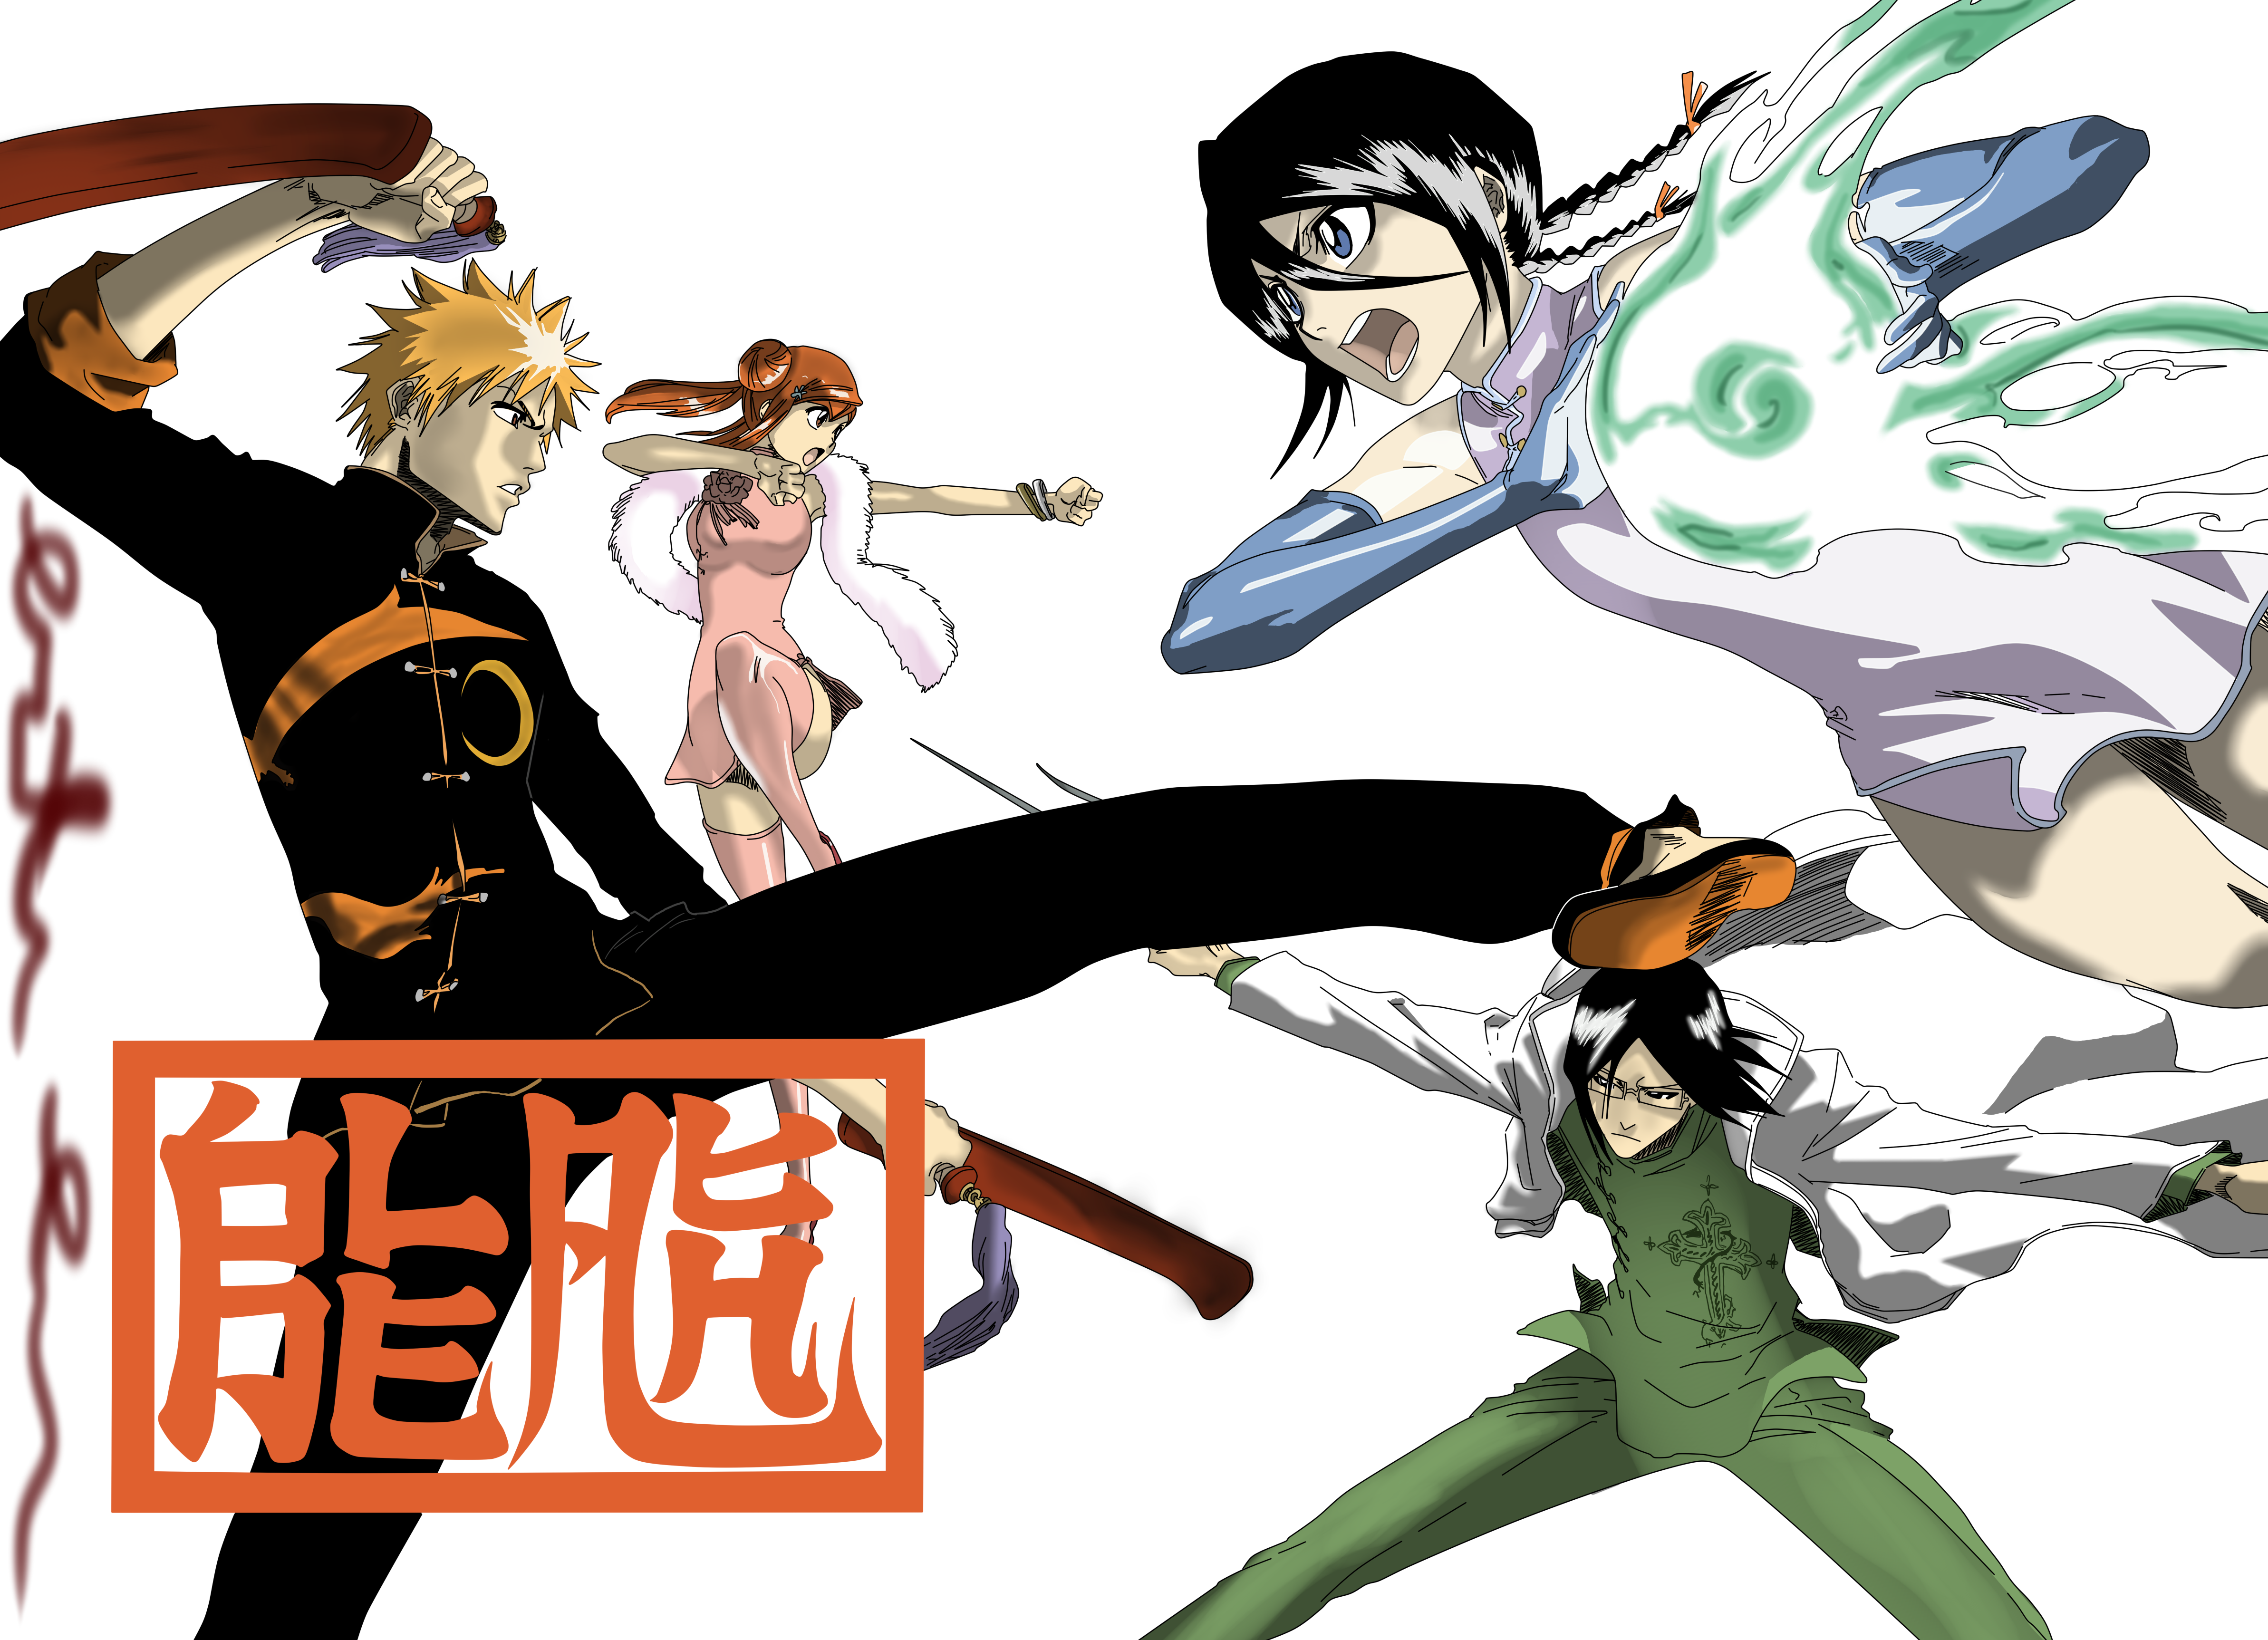 Bleach - Manga and Anime by Shirry on DeviantArt